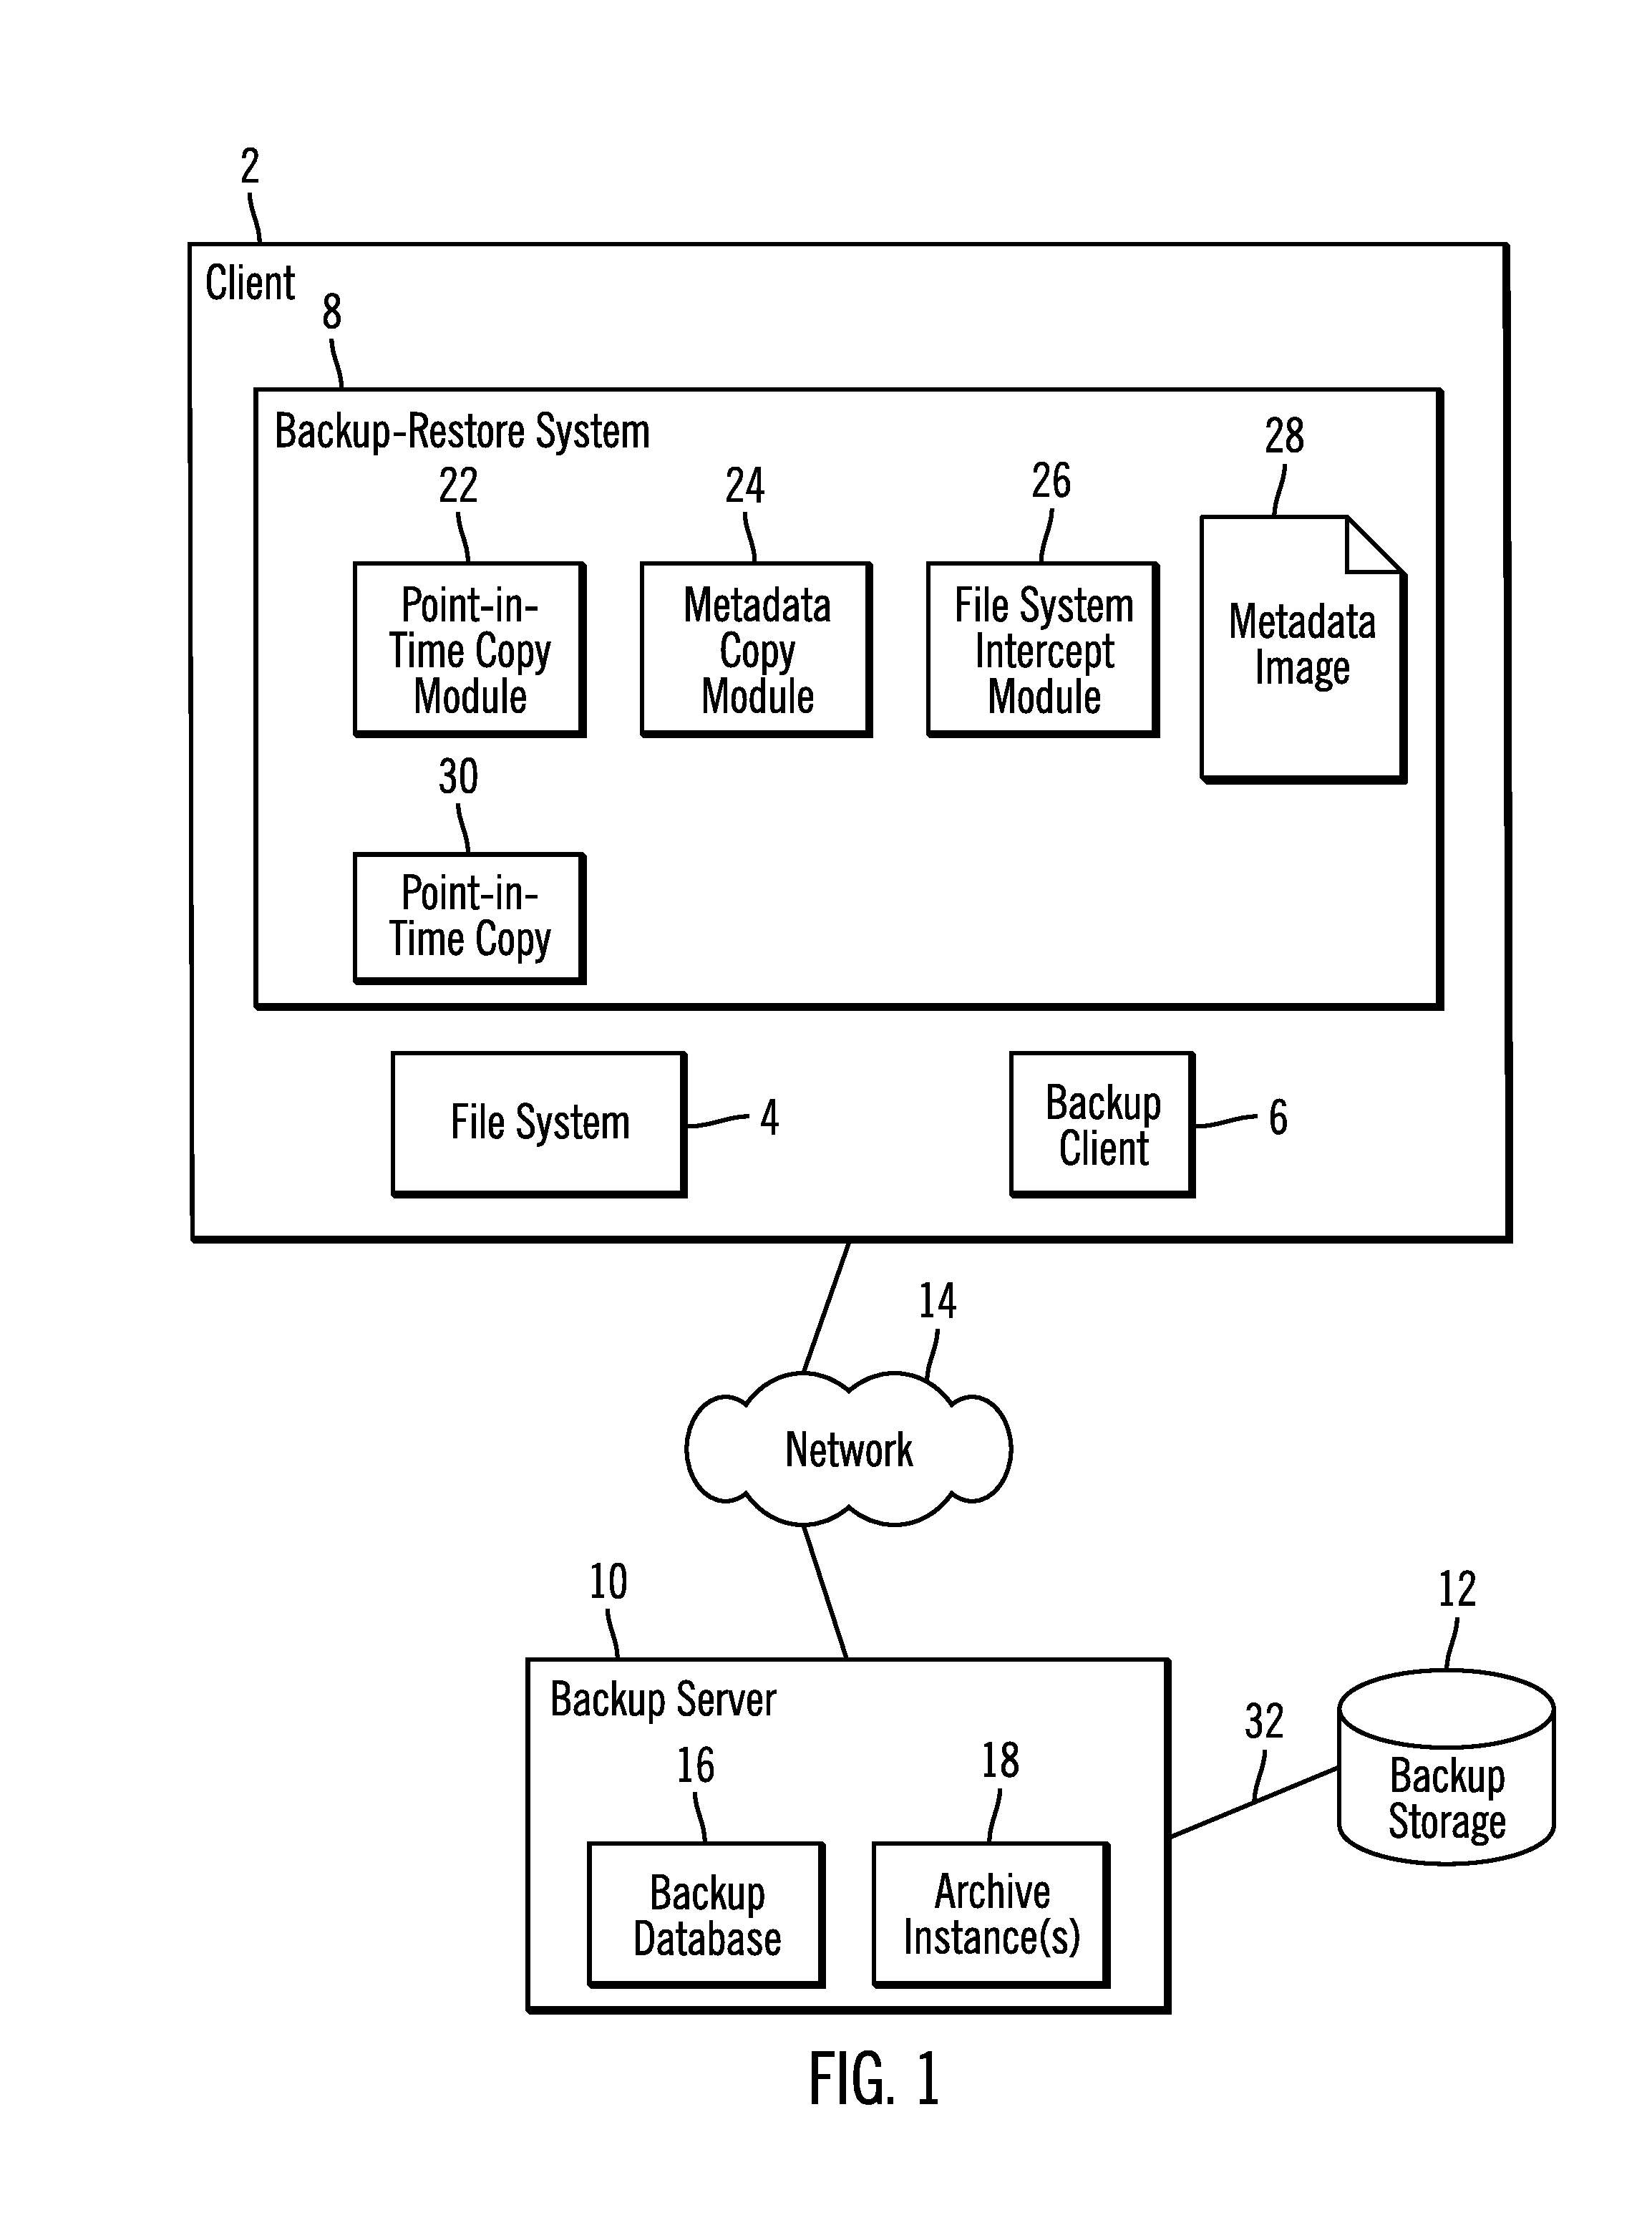 Using a metadata image of a file system and archive instance to restore data objects in the file system